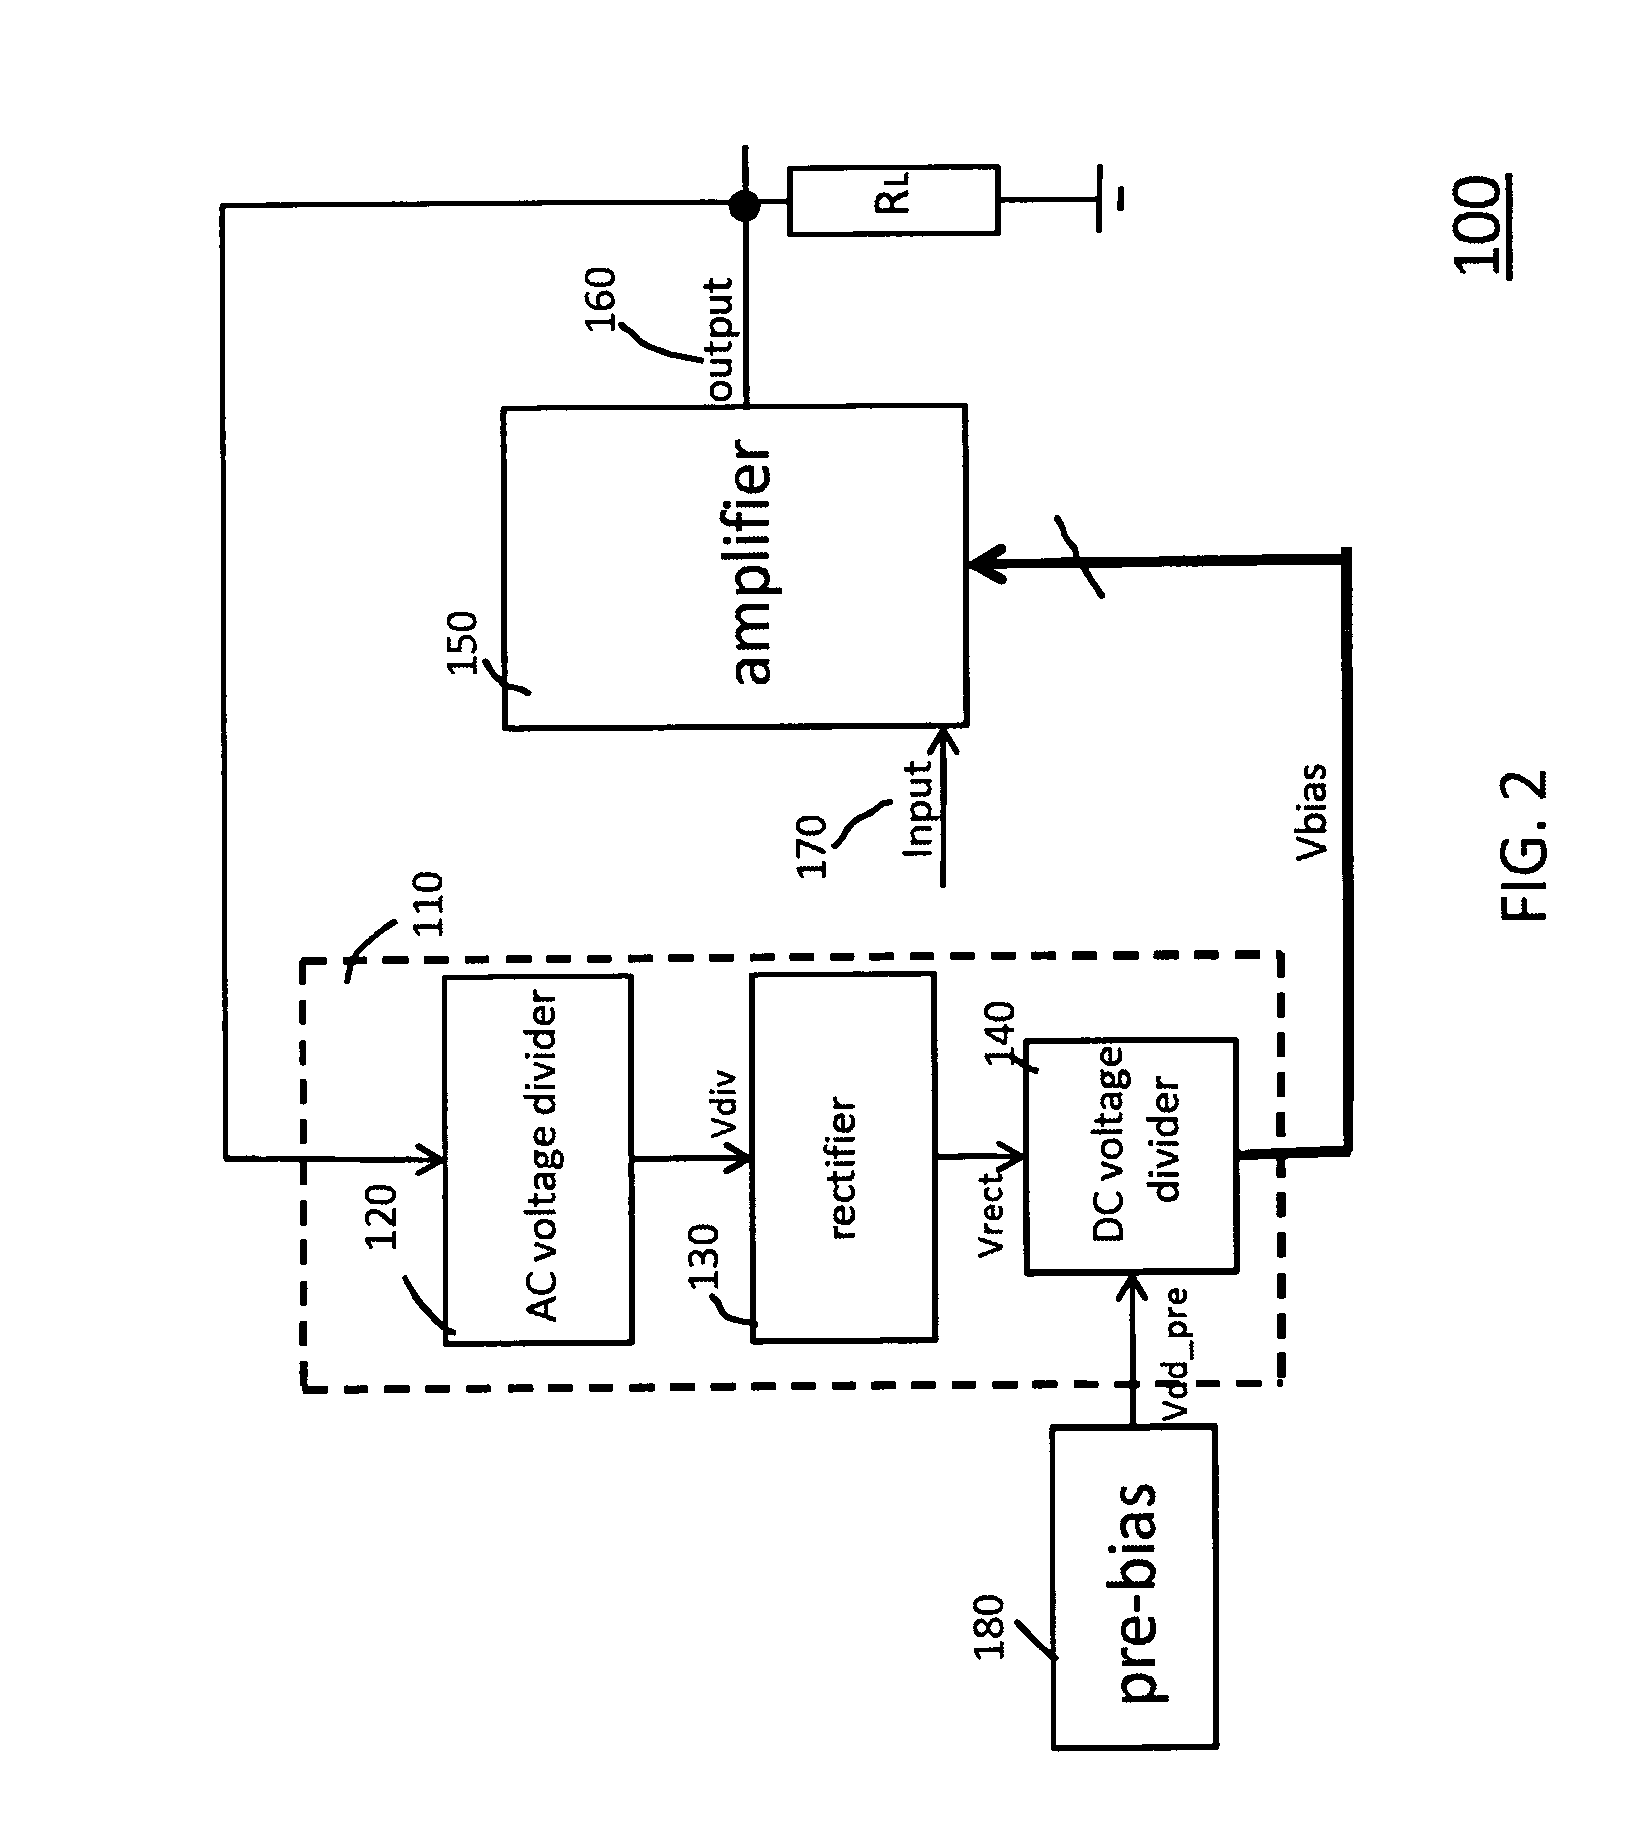 Biasing methods and devices for power amplifiers